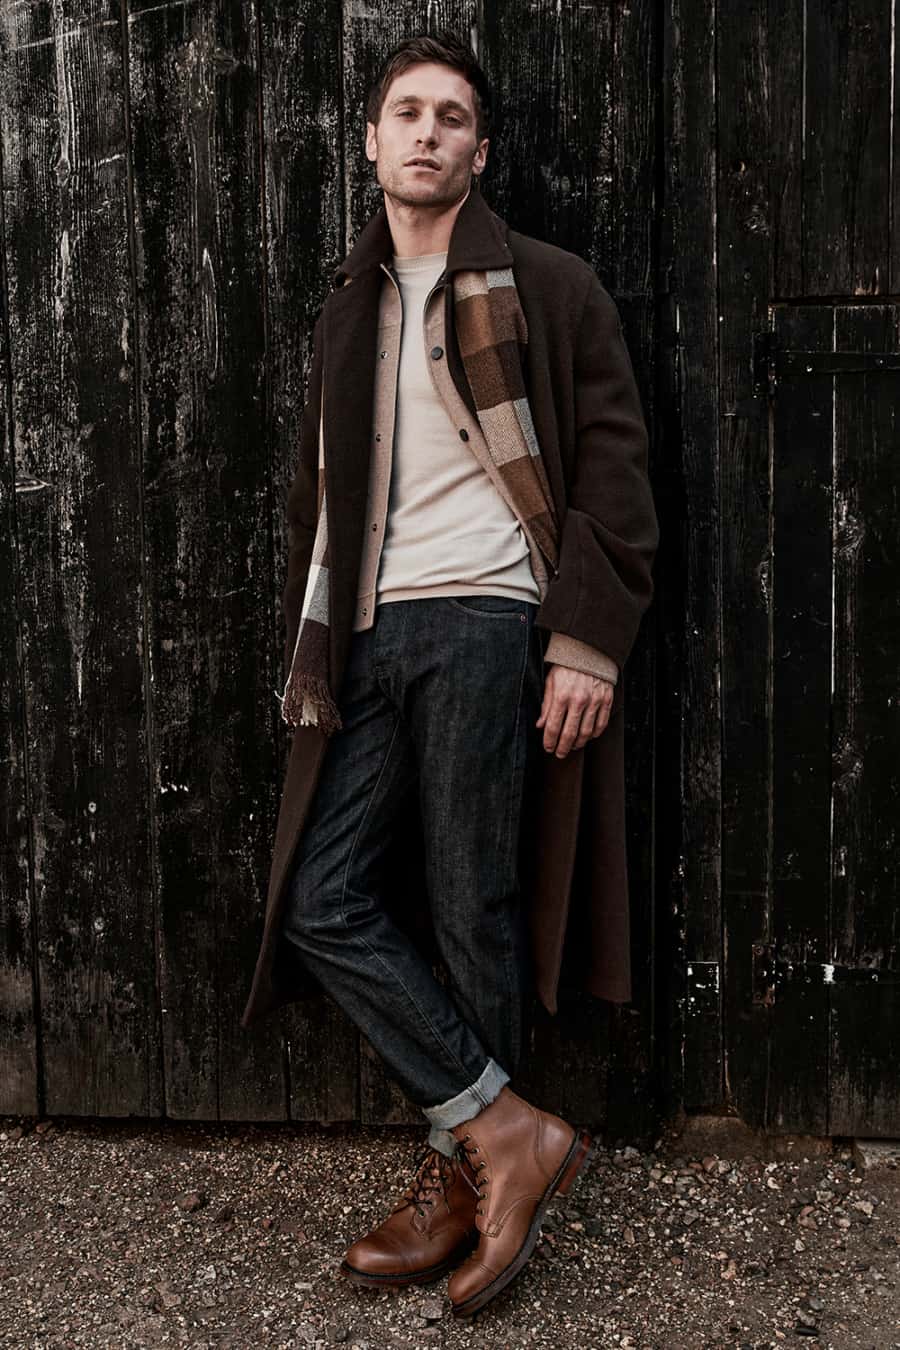 Men's raw denim jeans worn with brown boots, lightweight sweater and brown overcoat outfit